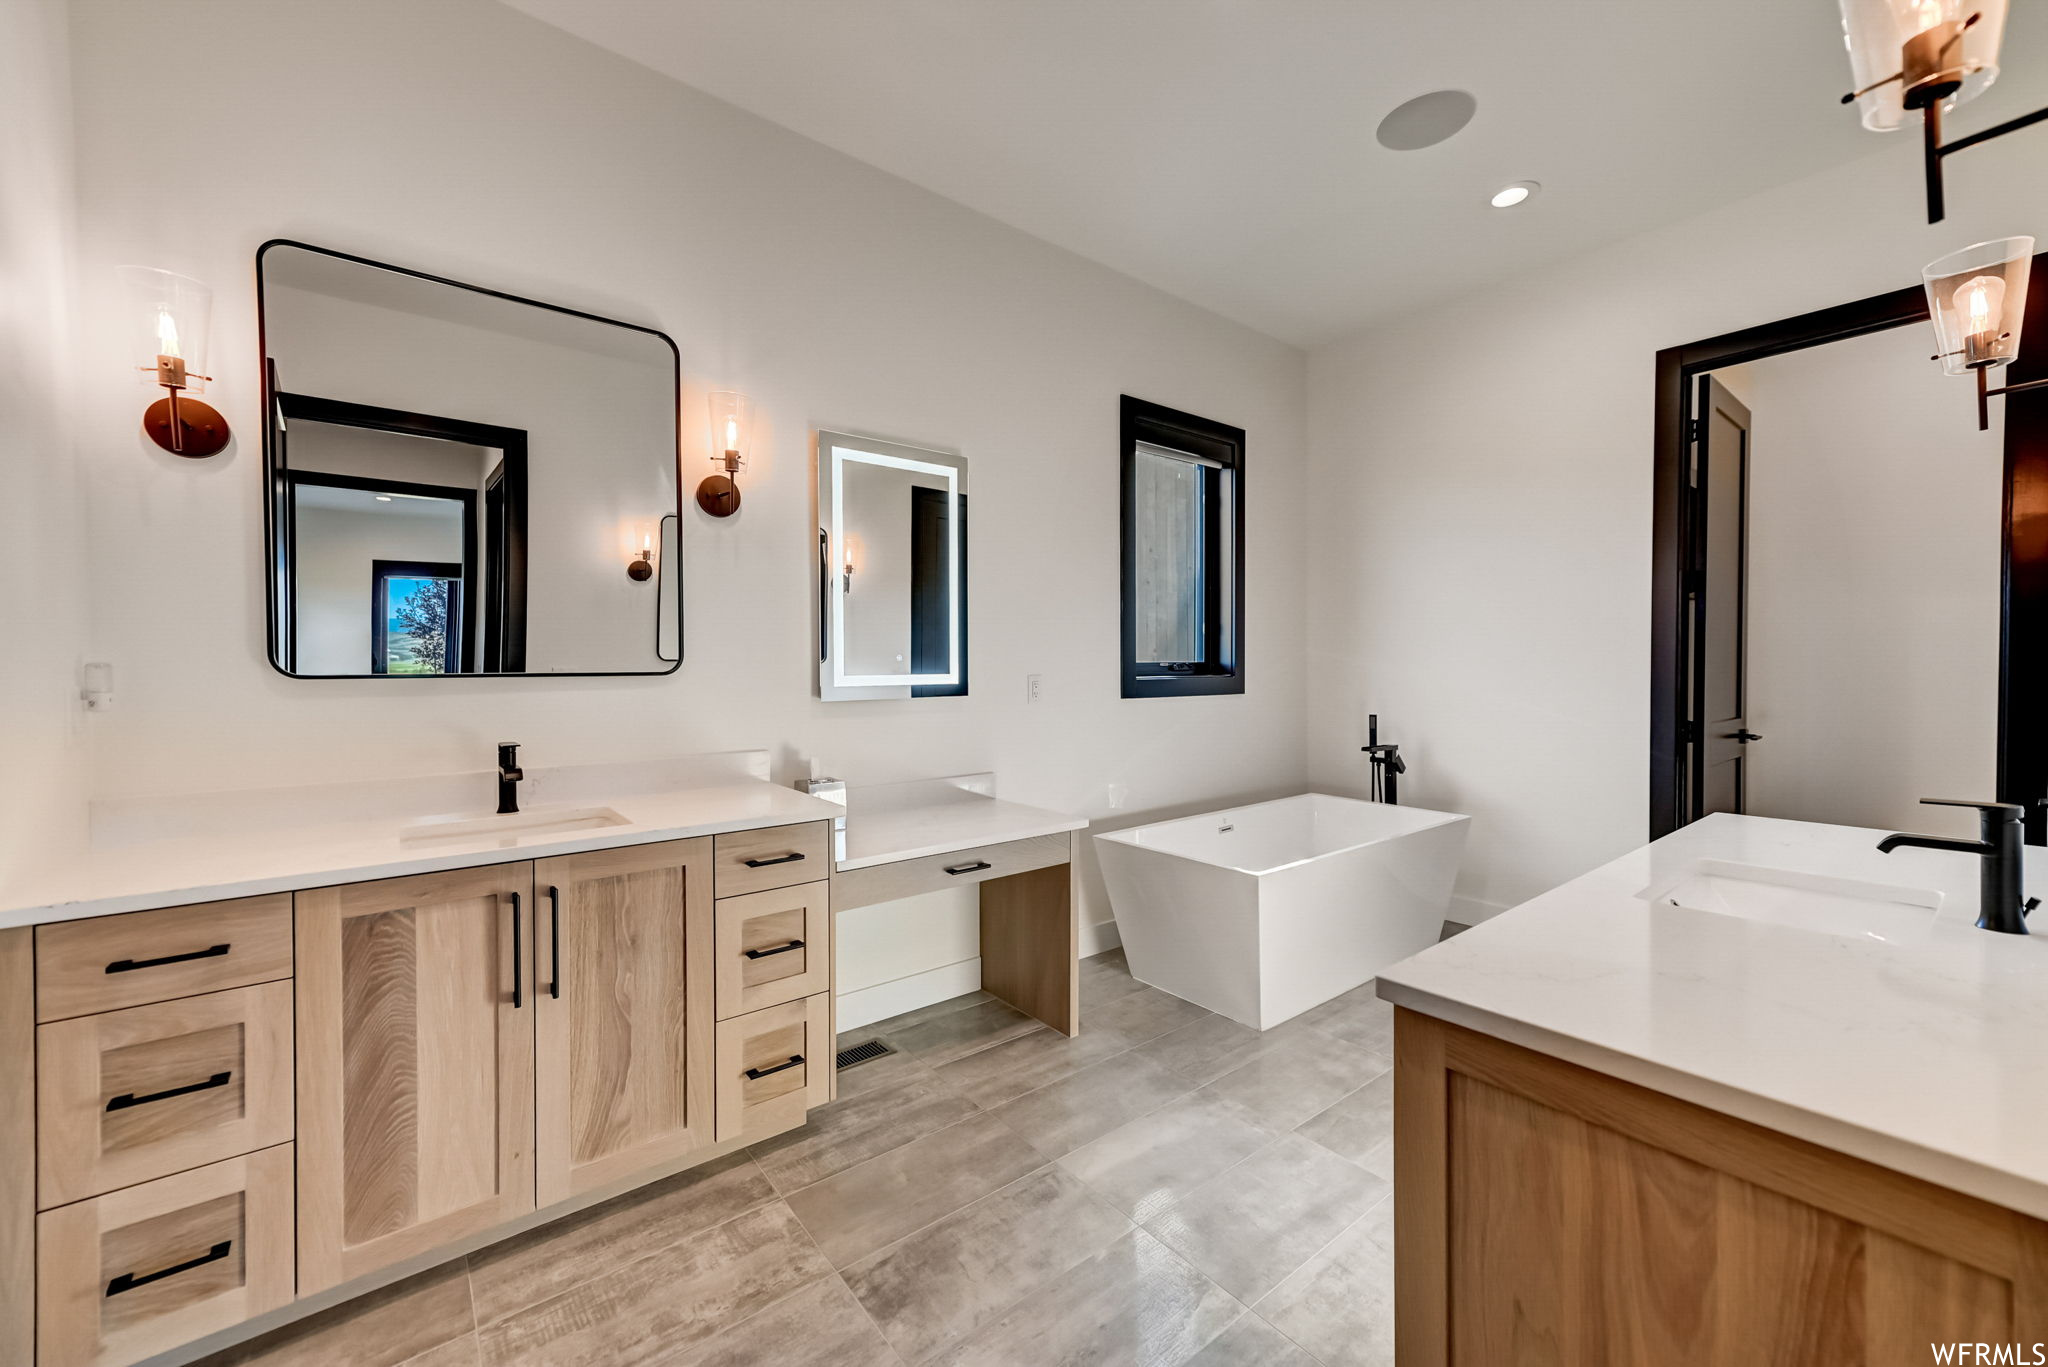 Bathroom featuring double sink, tile floors, a tub, and vanity with extensive cabinet space